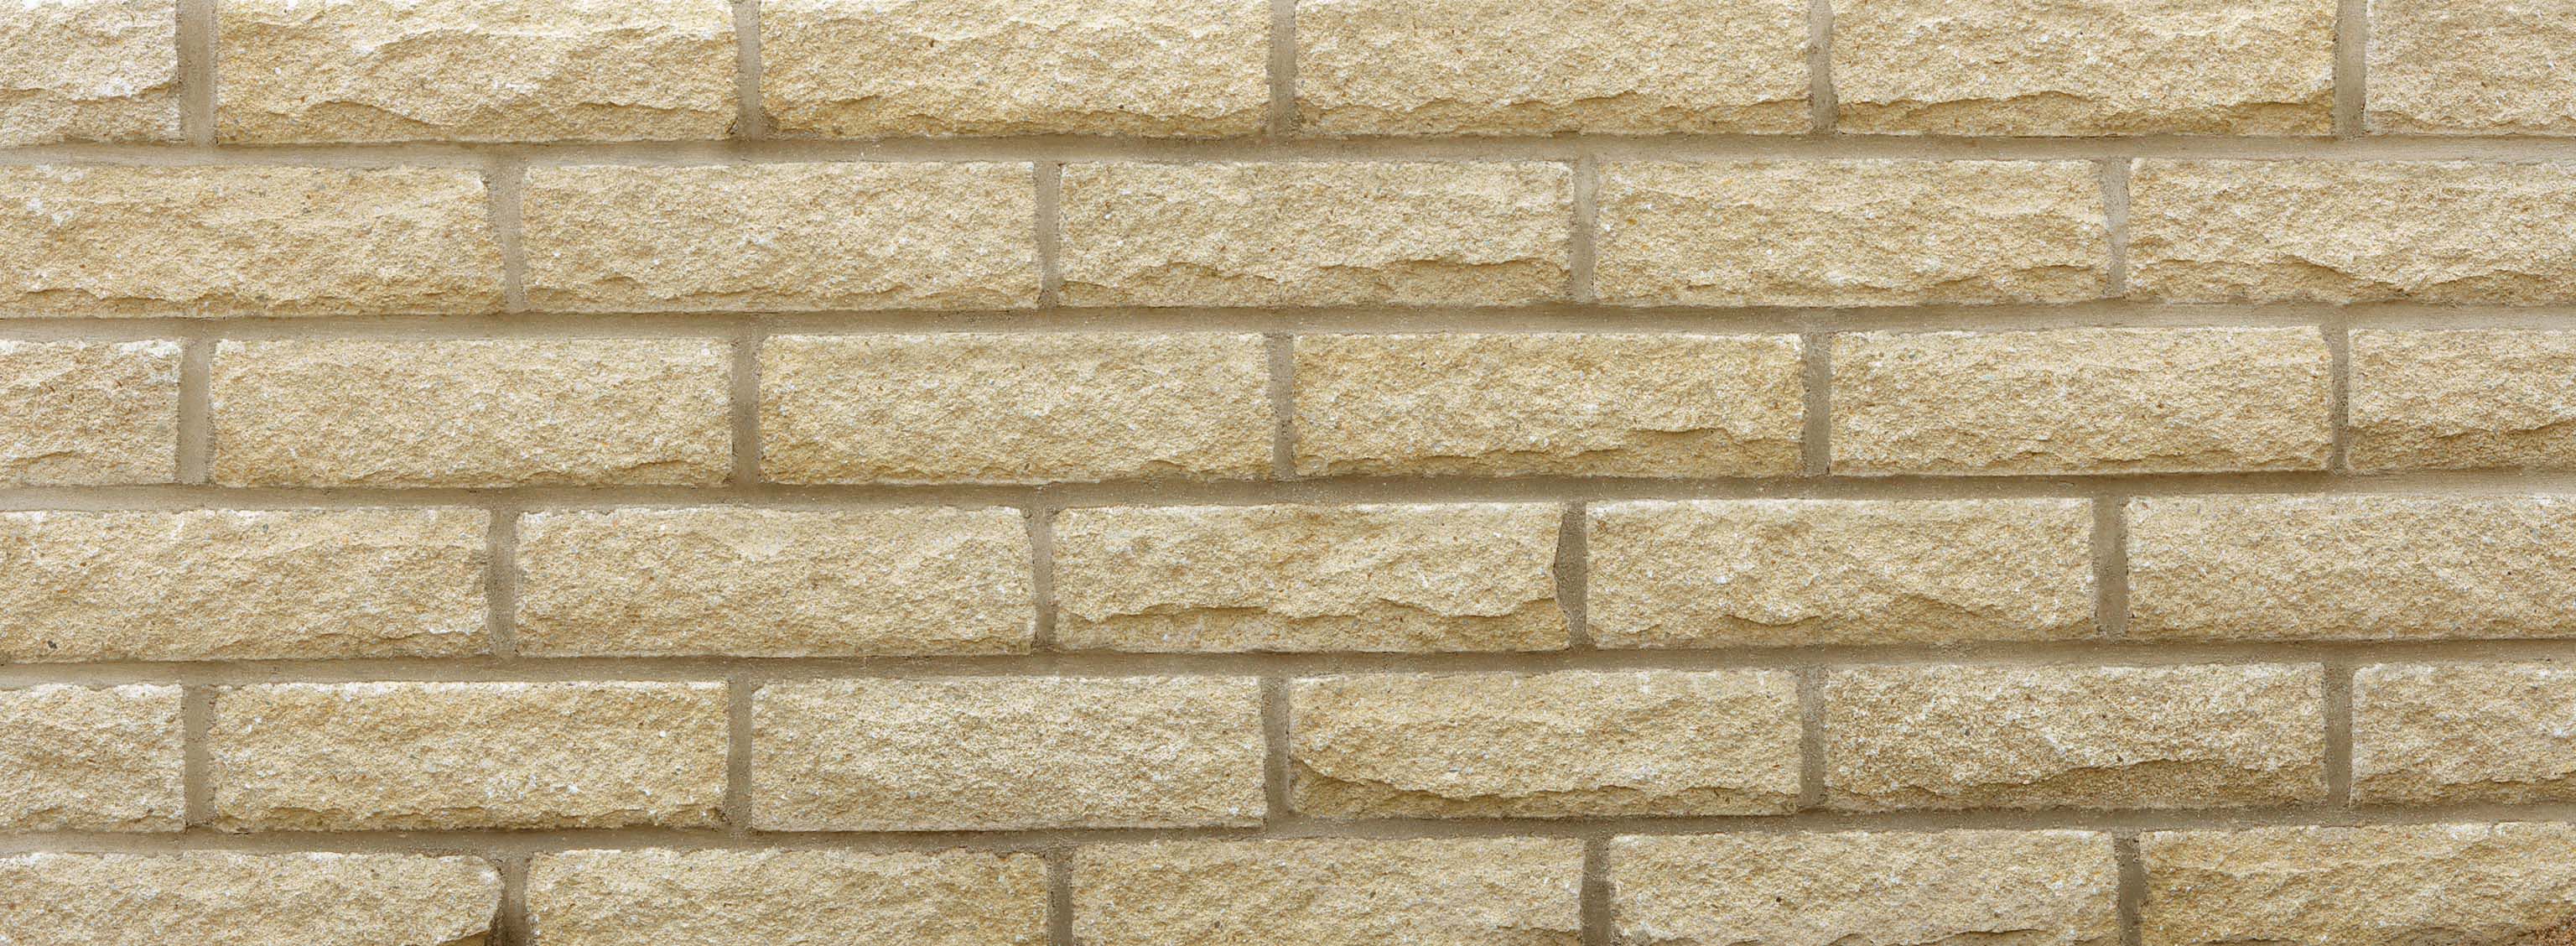 Marshalls Marshalite Textured Pitch Faced Buff Walling Stone - Sample